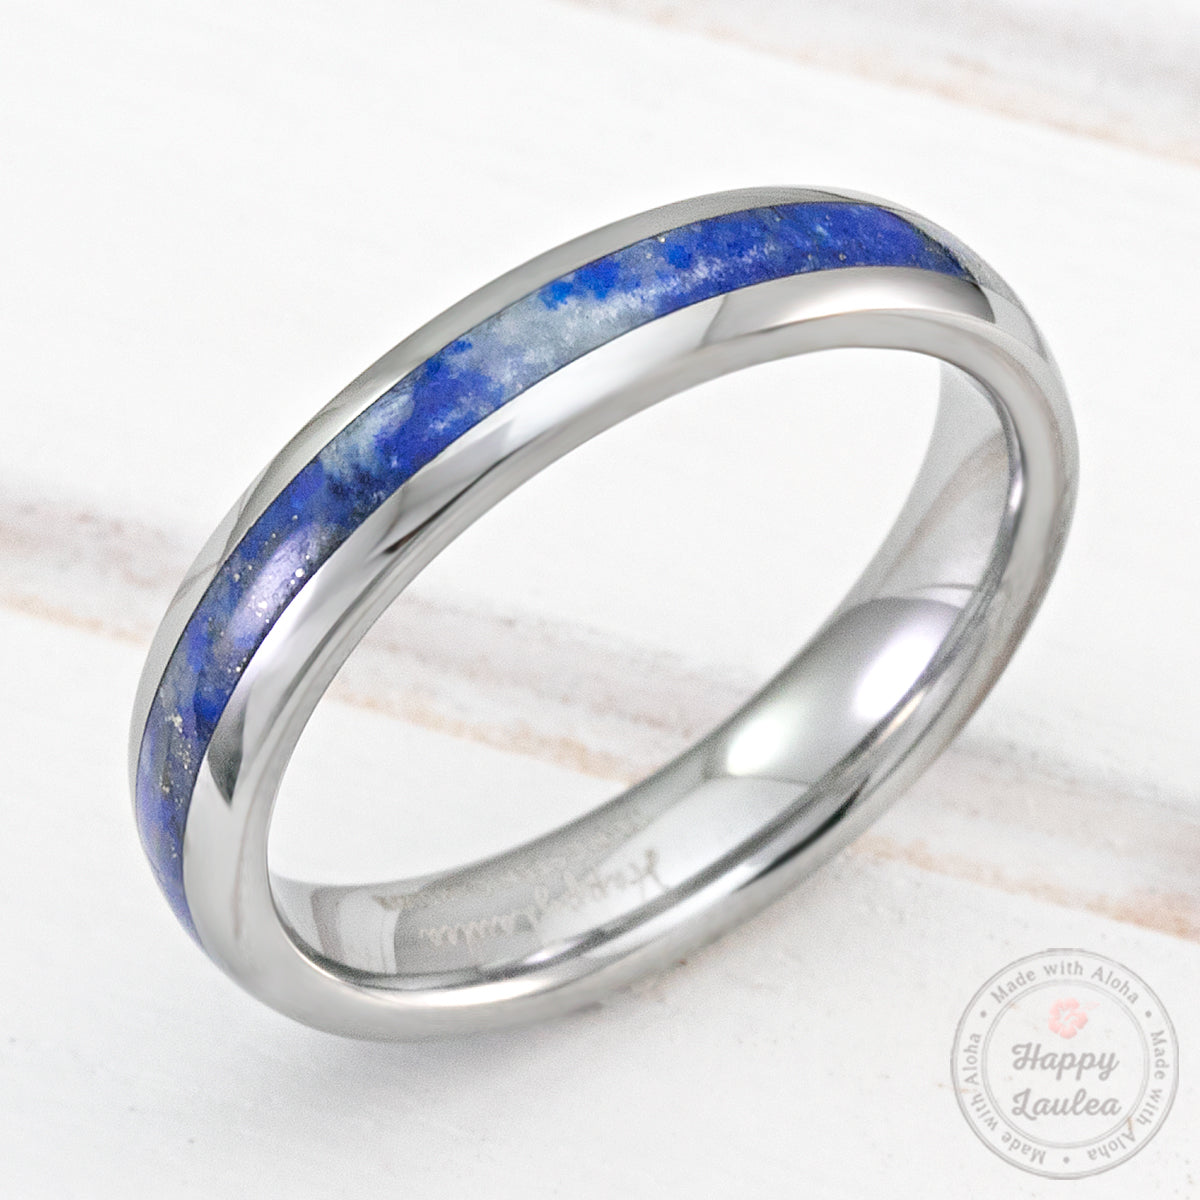 Pair of 4&8mm Tungsten Carbide Rings with Lapis Lazuli Inlay - Dome Shape, Comfort Fitment